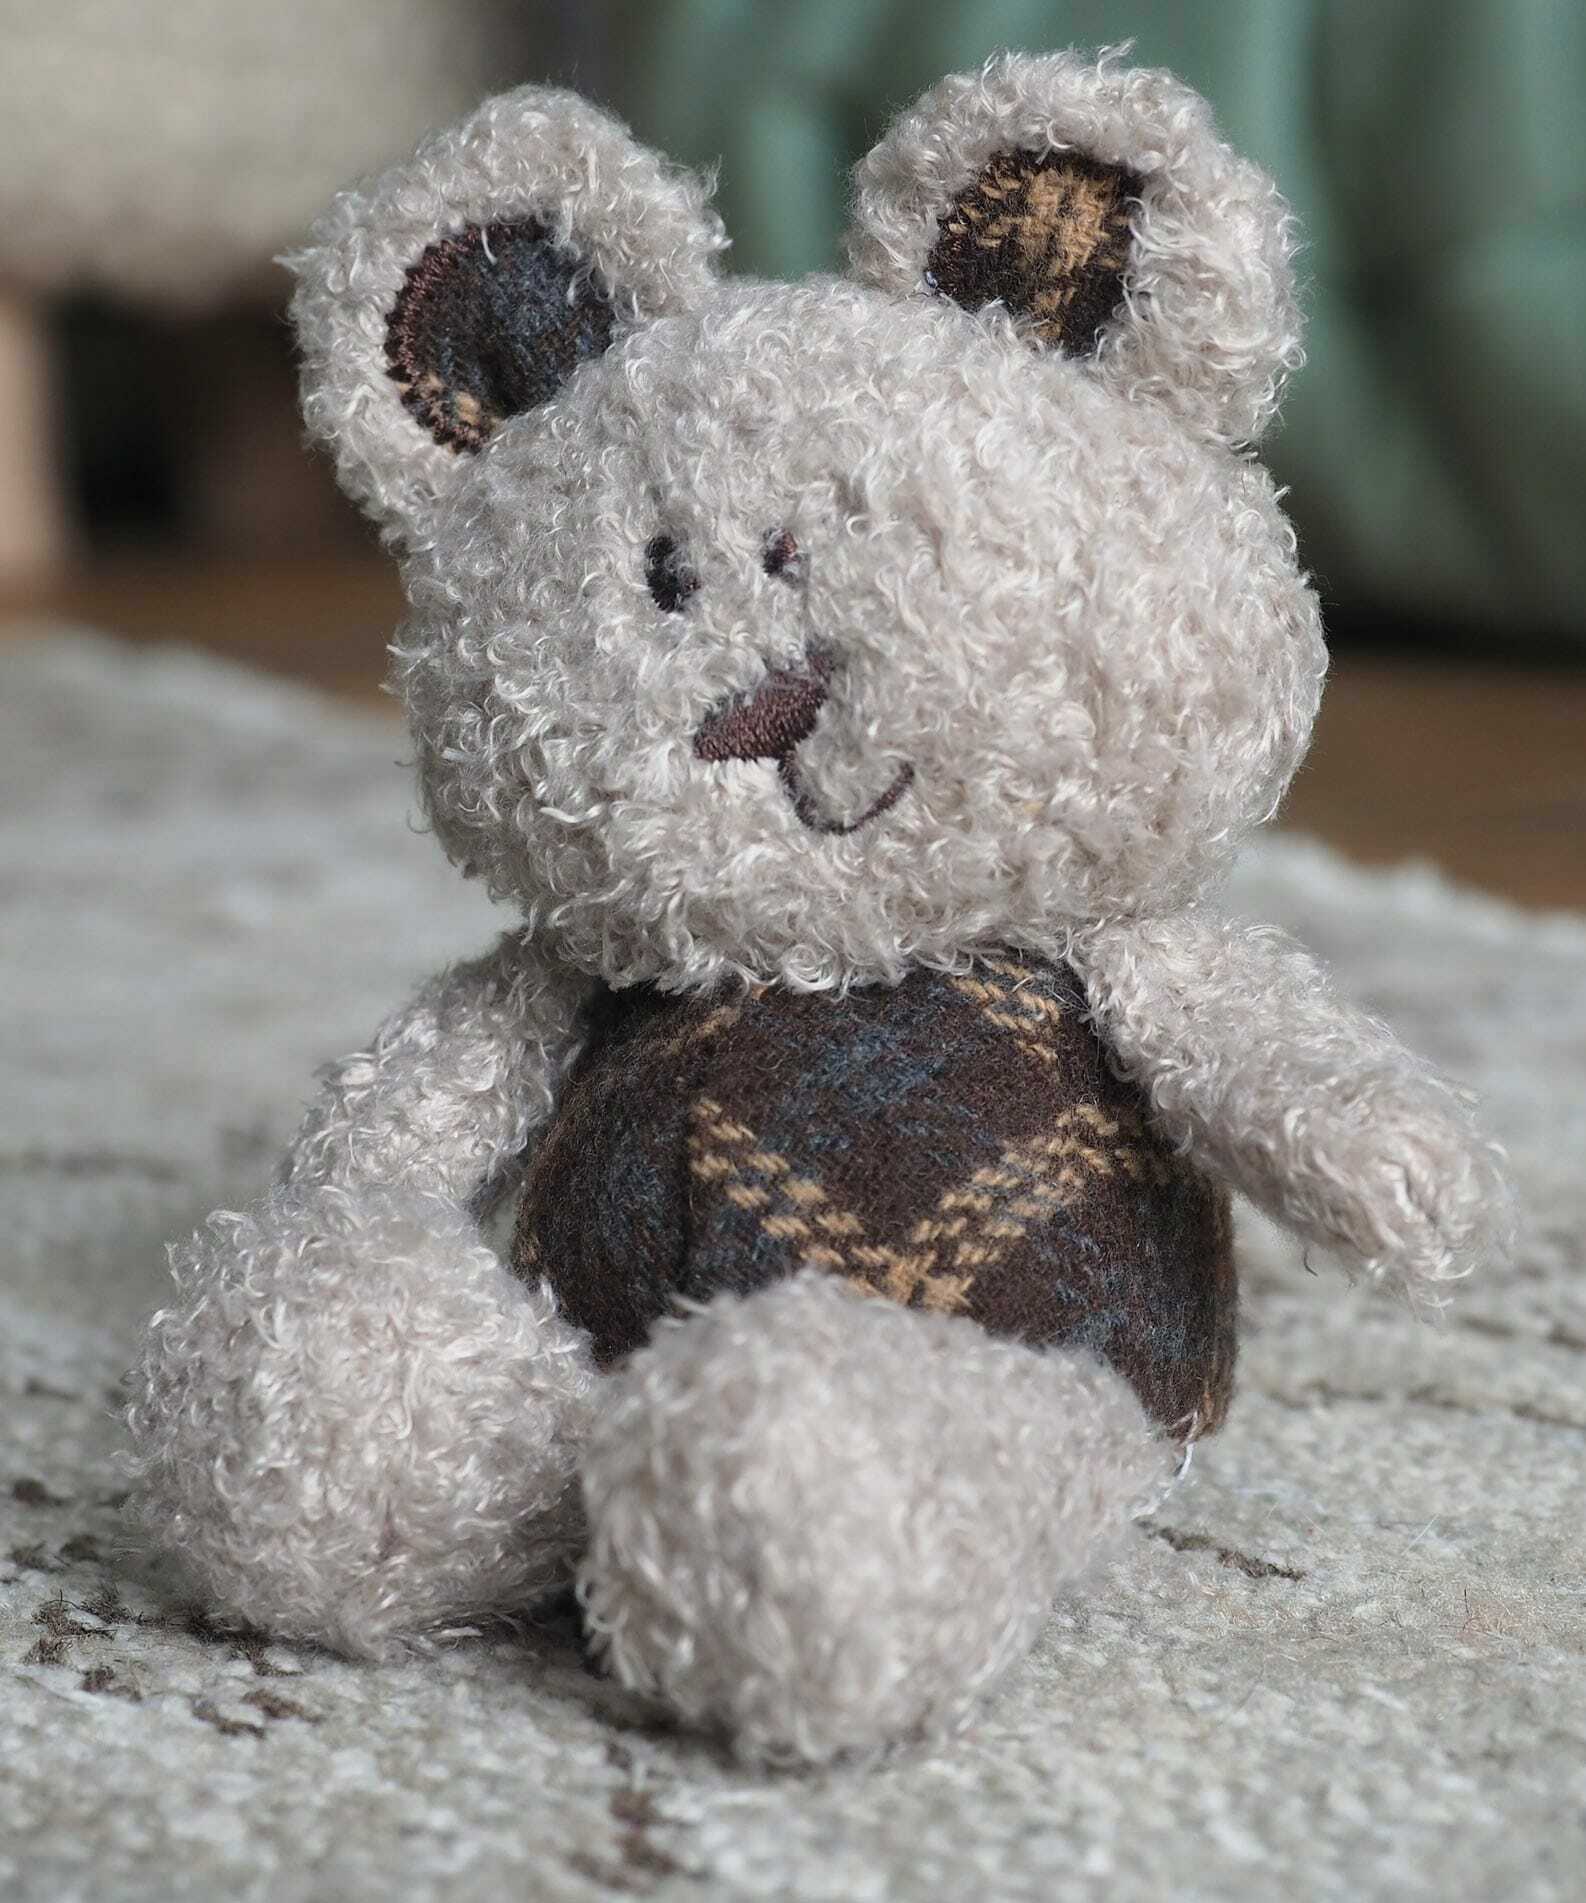 Soft Little Ted Bear sitting on a rug